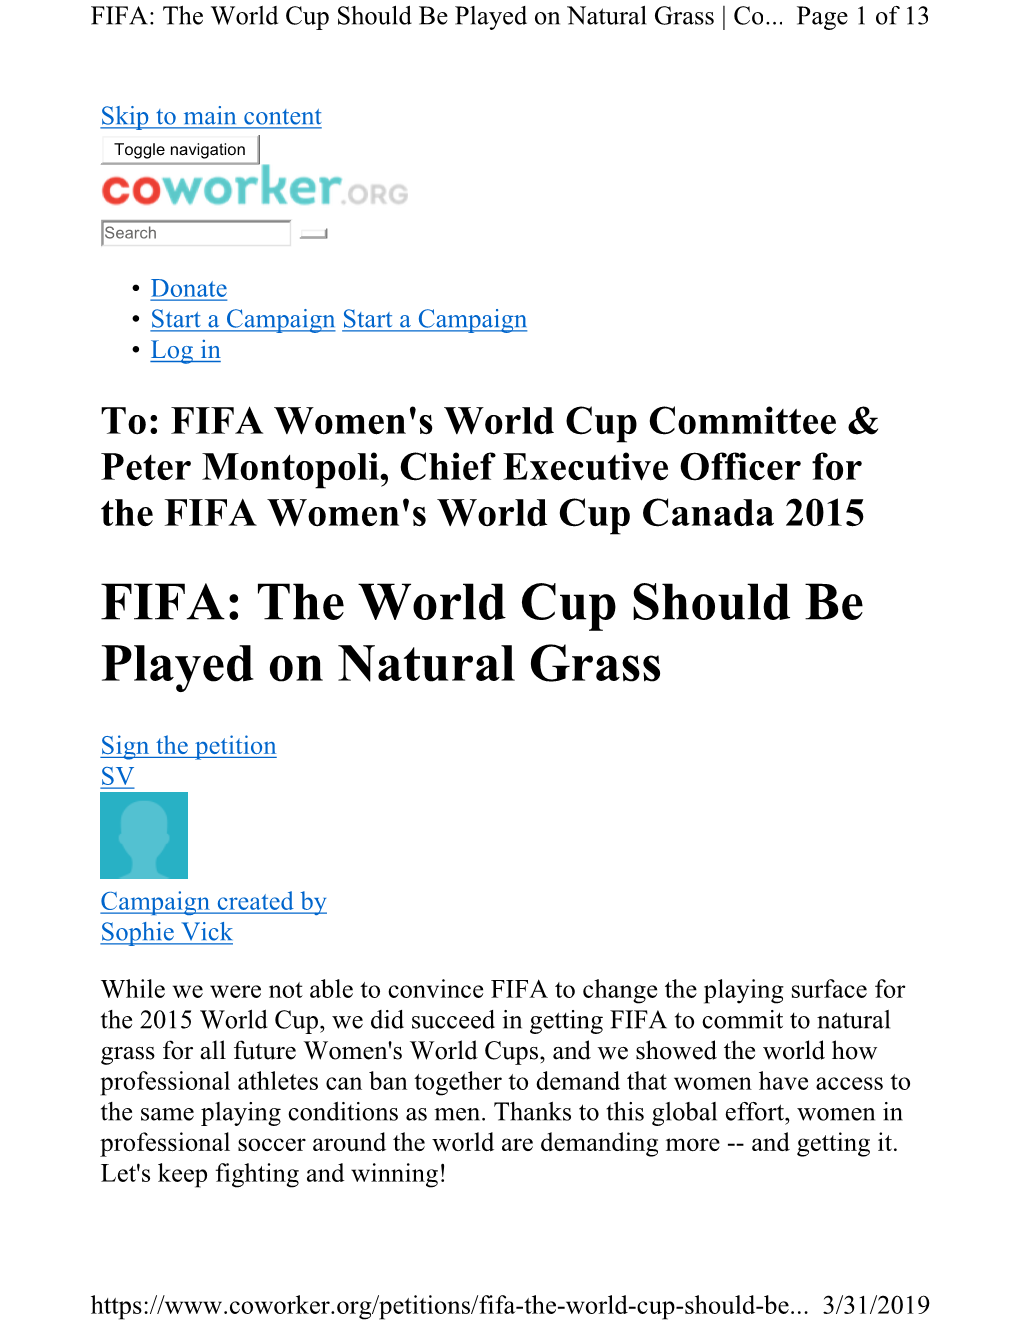 FIFA: the World Cup Should Be Played on Natural Grass | Co